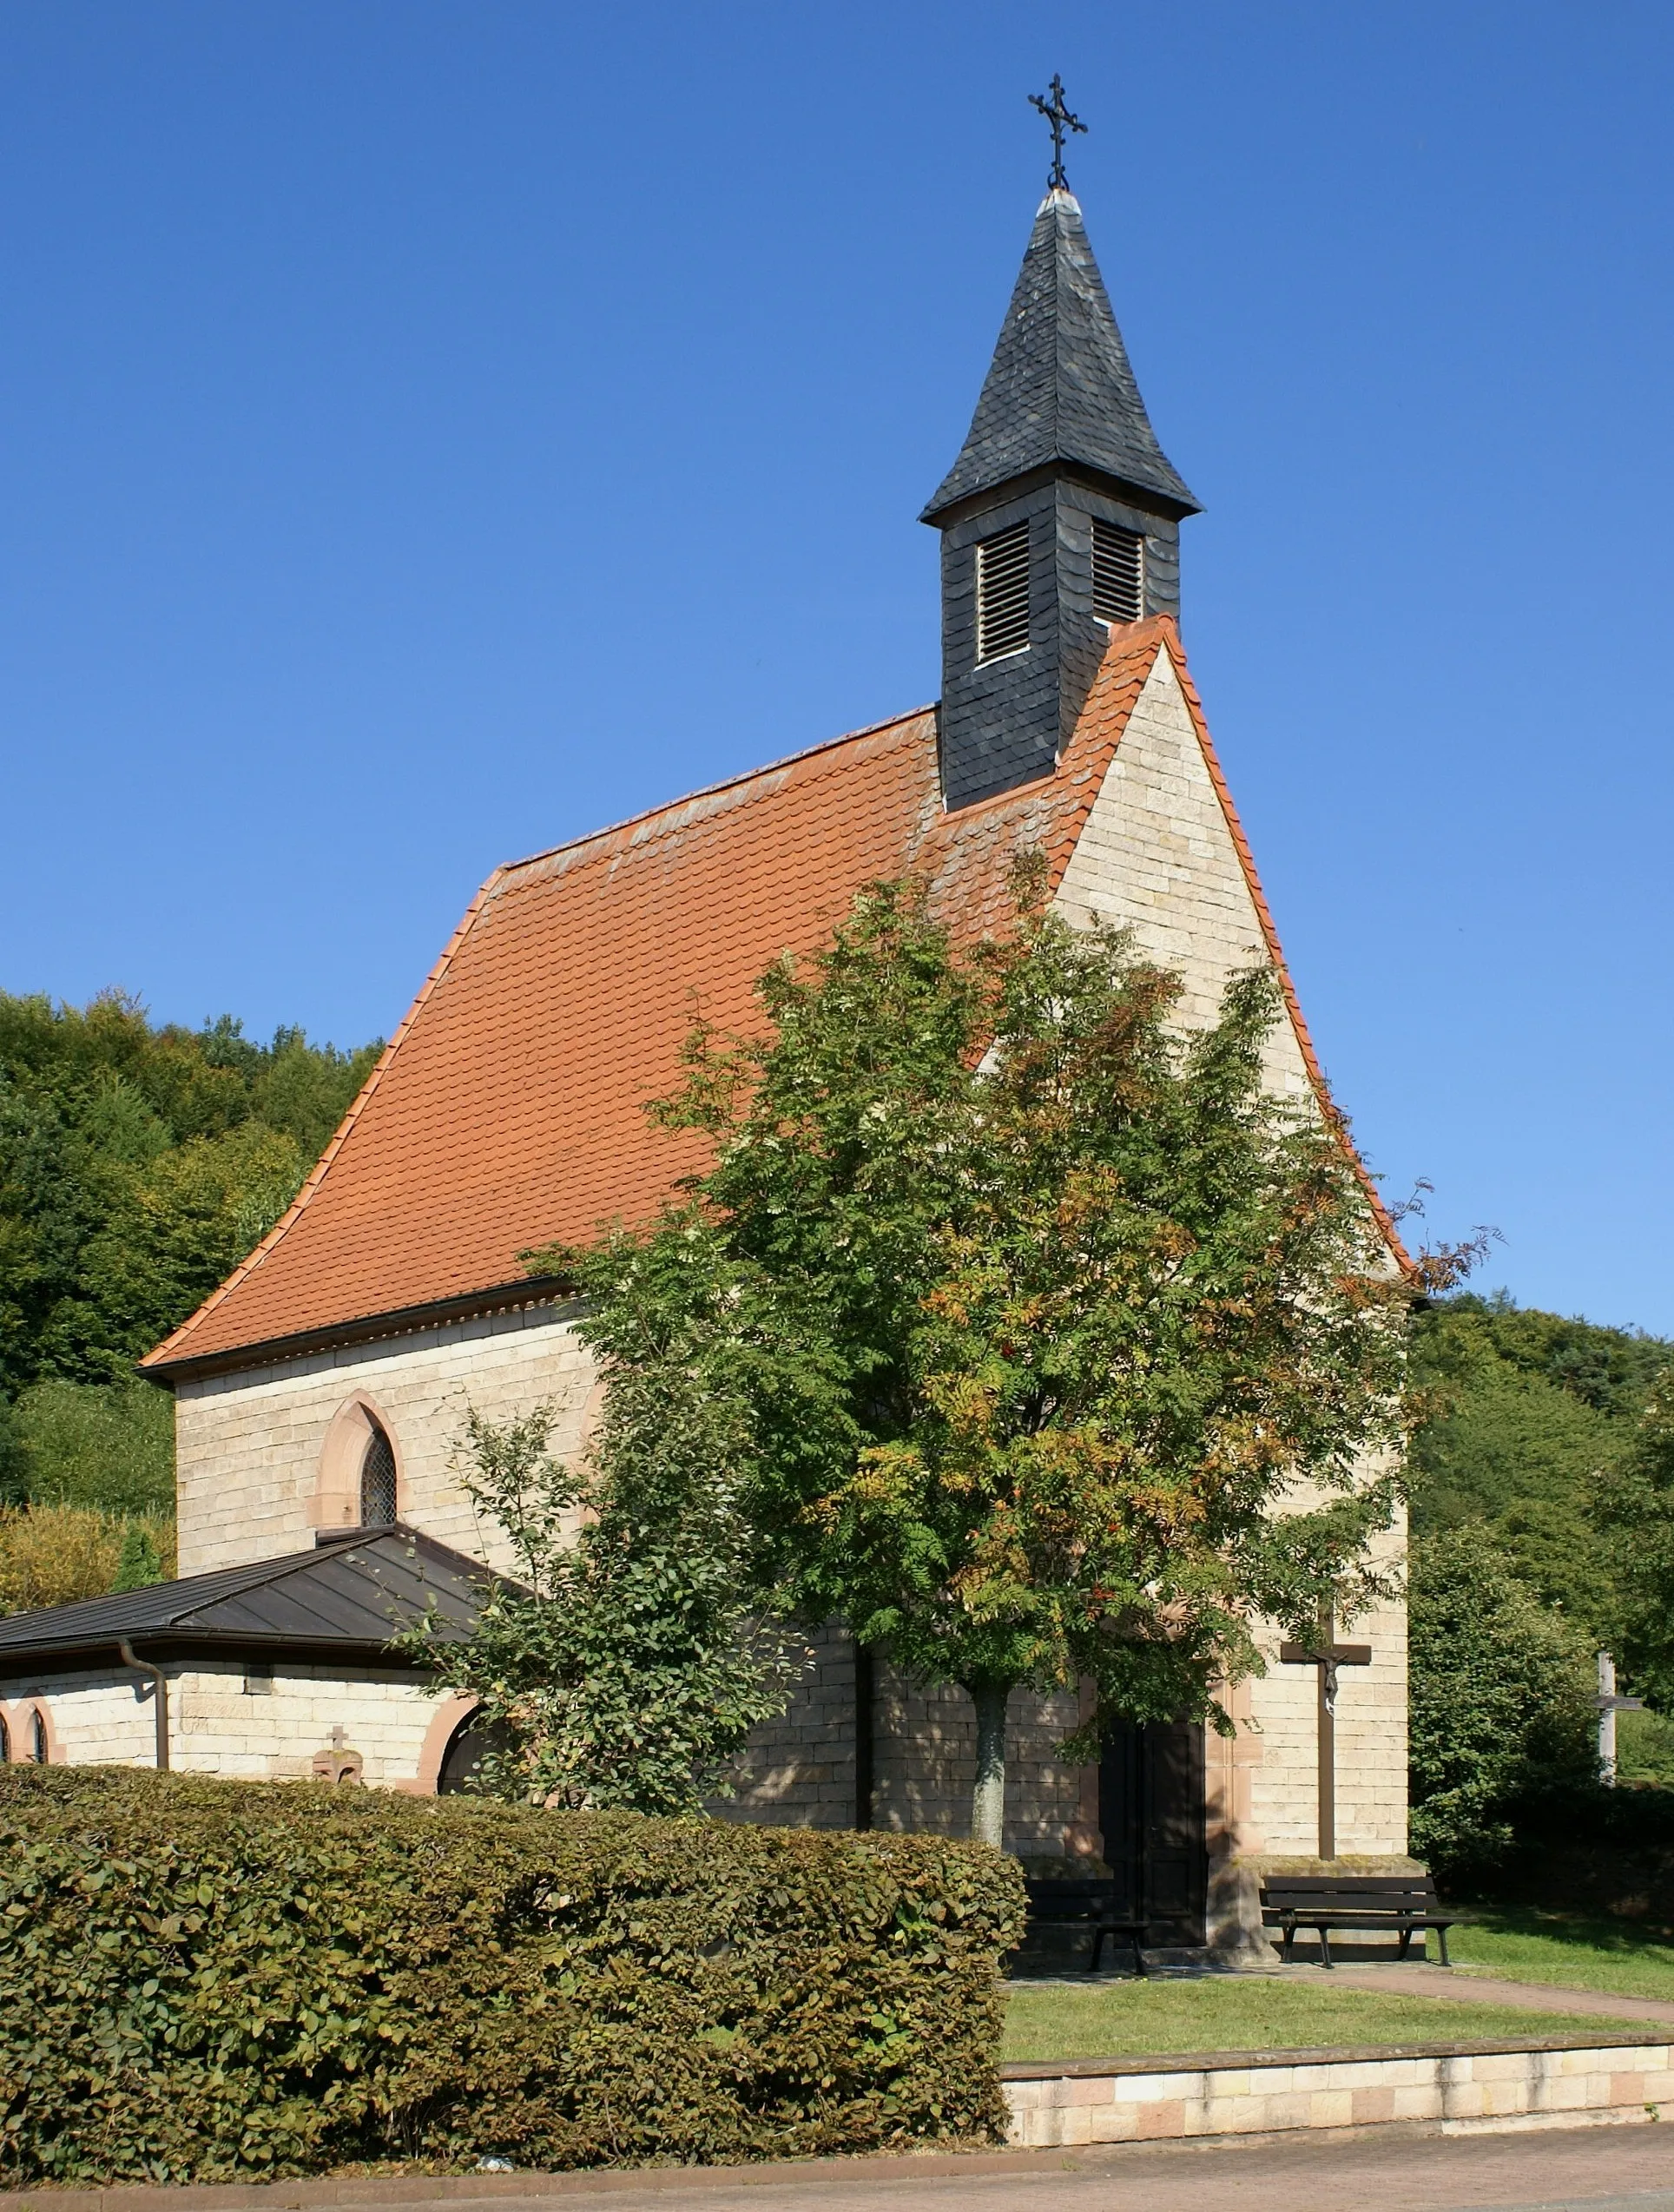 Photo showing: The Marienkapelle is located at the border of the village Eichenberg